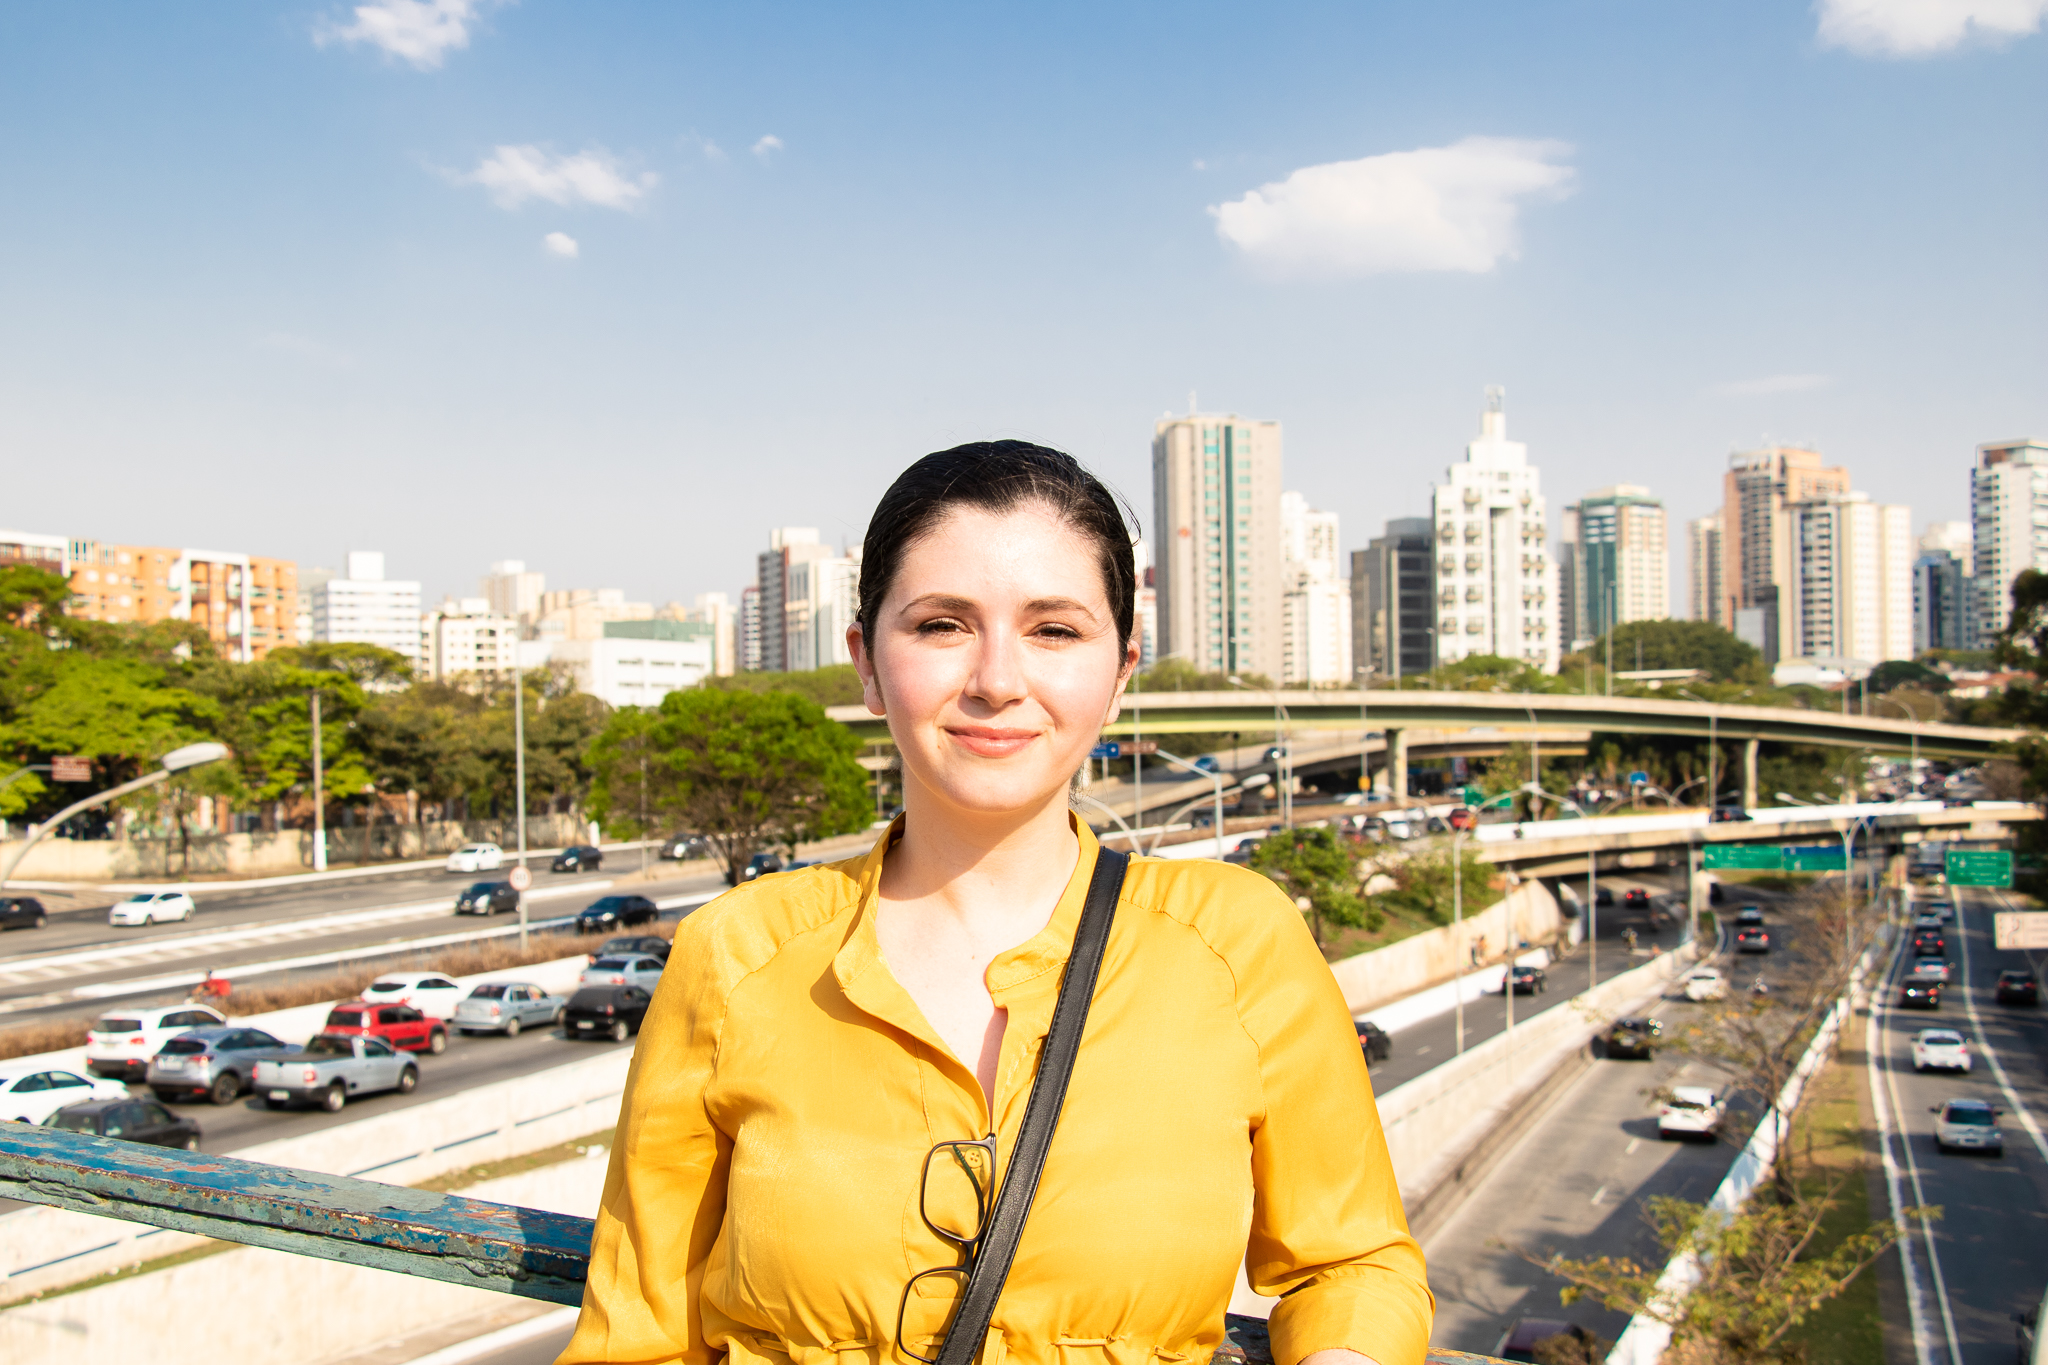 PhD student Jessica Mendes, standing on a bridge over a busy highway in Brazil